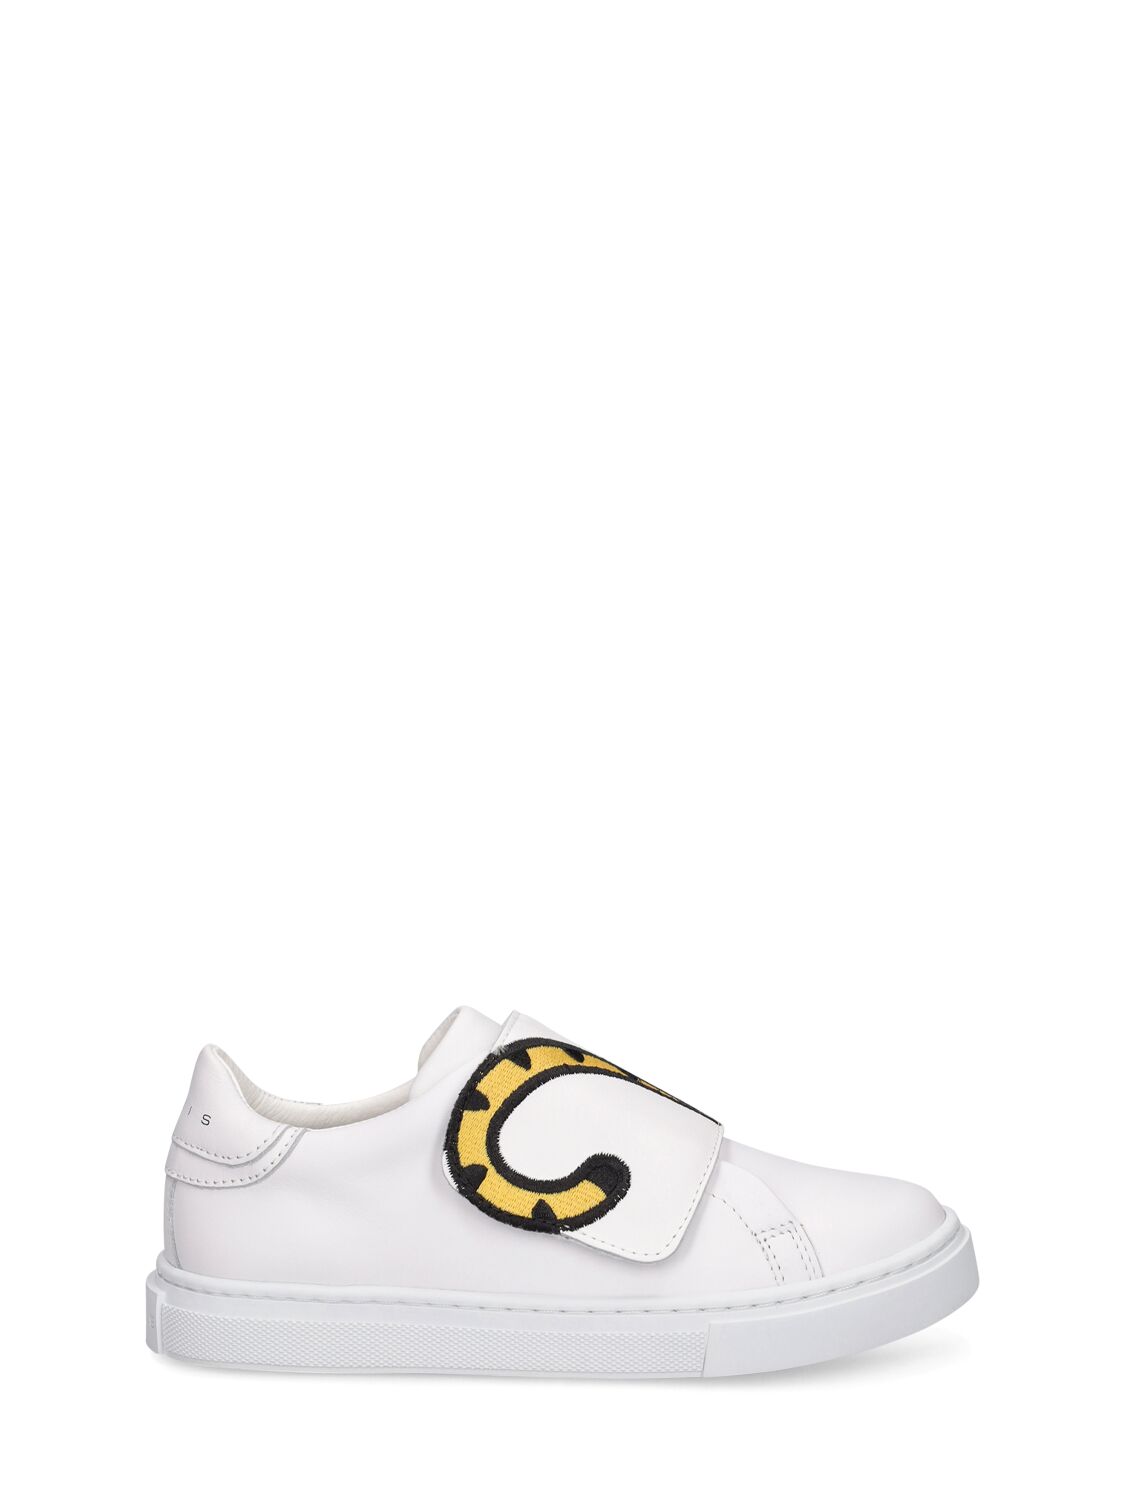 Kenzo Kids' Tiger Printed Leather Trainers W/ Straps In White